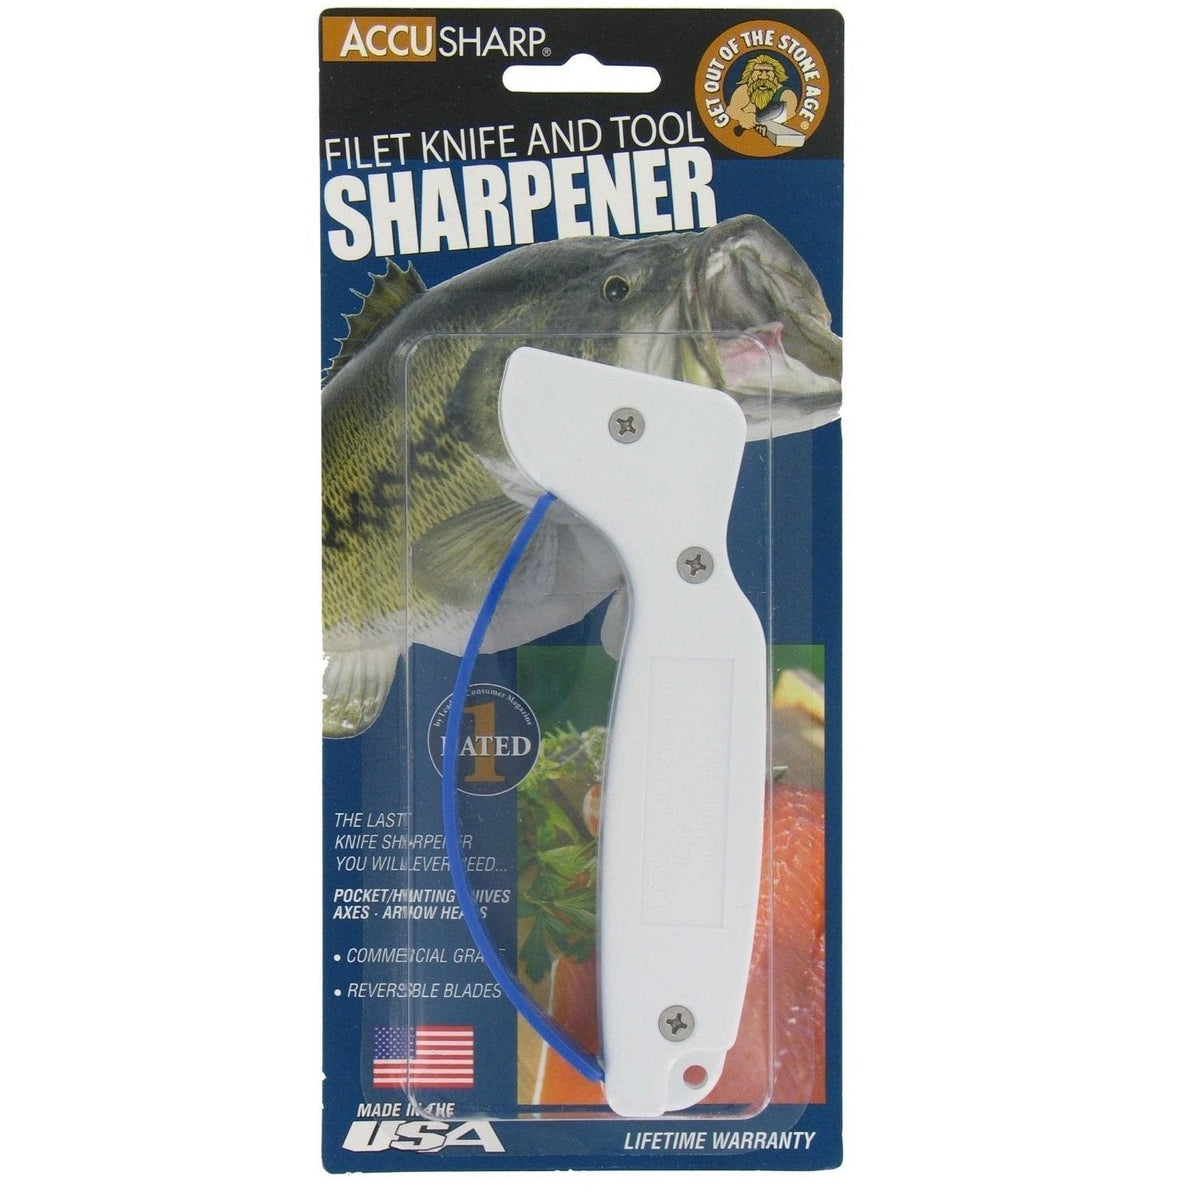 AccuSharp Filet Knife Sharpener Blades and Multi-Tools AccuSharp Tactical Gear Supplier Tactical Distributors Australia